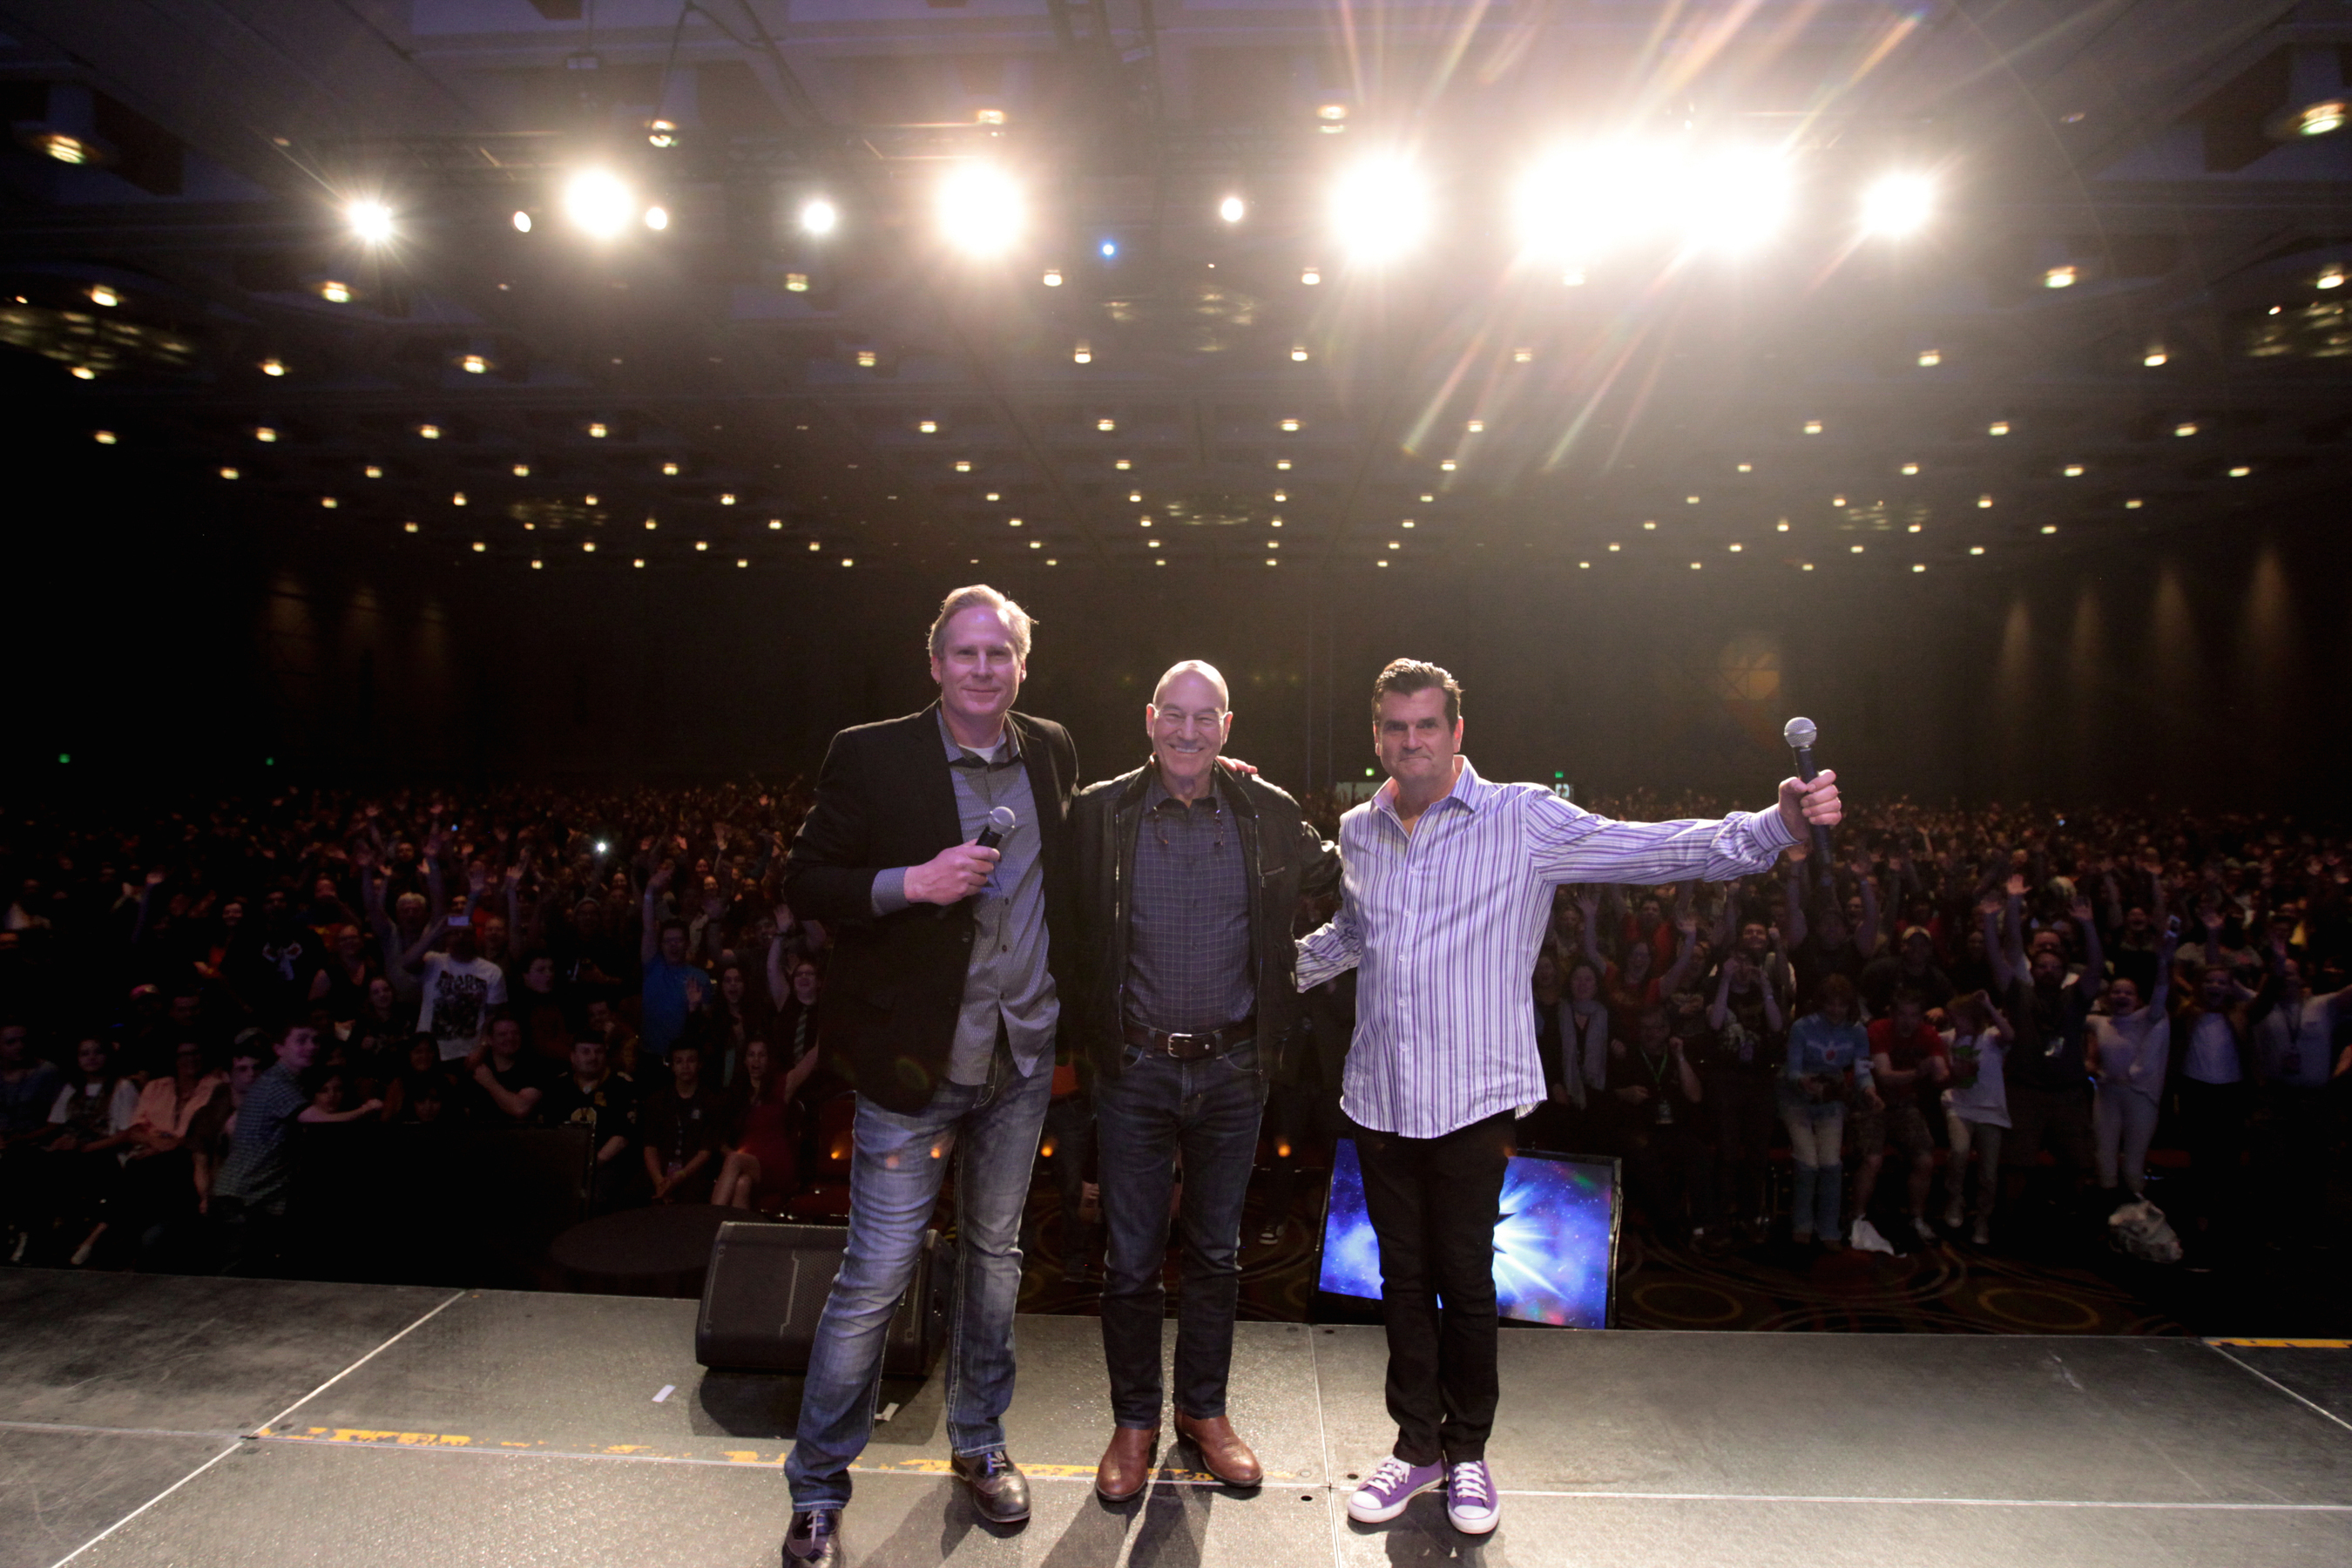 Sir Patrick Stewart's Appearance at Salt Lake Comic Con FanX helped make it the third largest Comic Con in the United States. (PRNewsFoto/Salt Lake Comic Con)